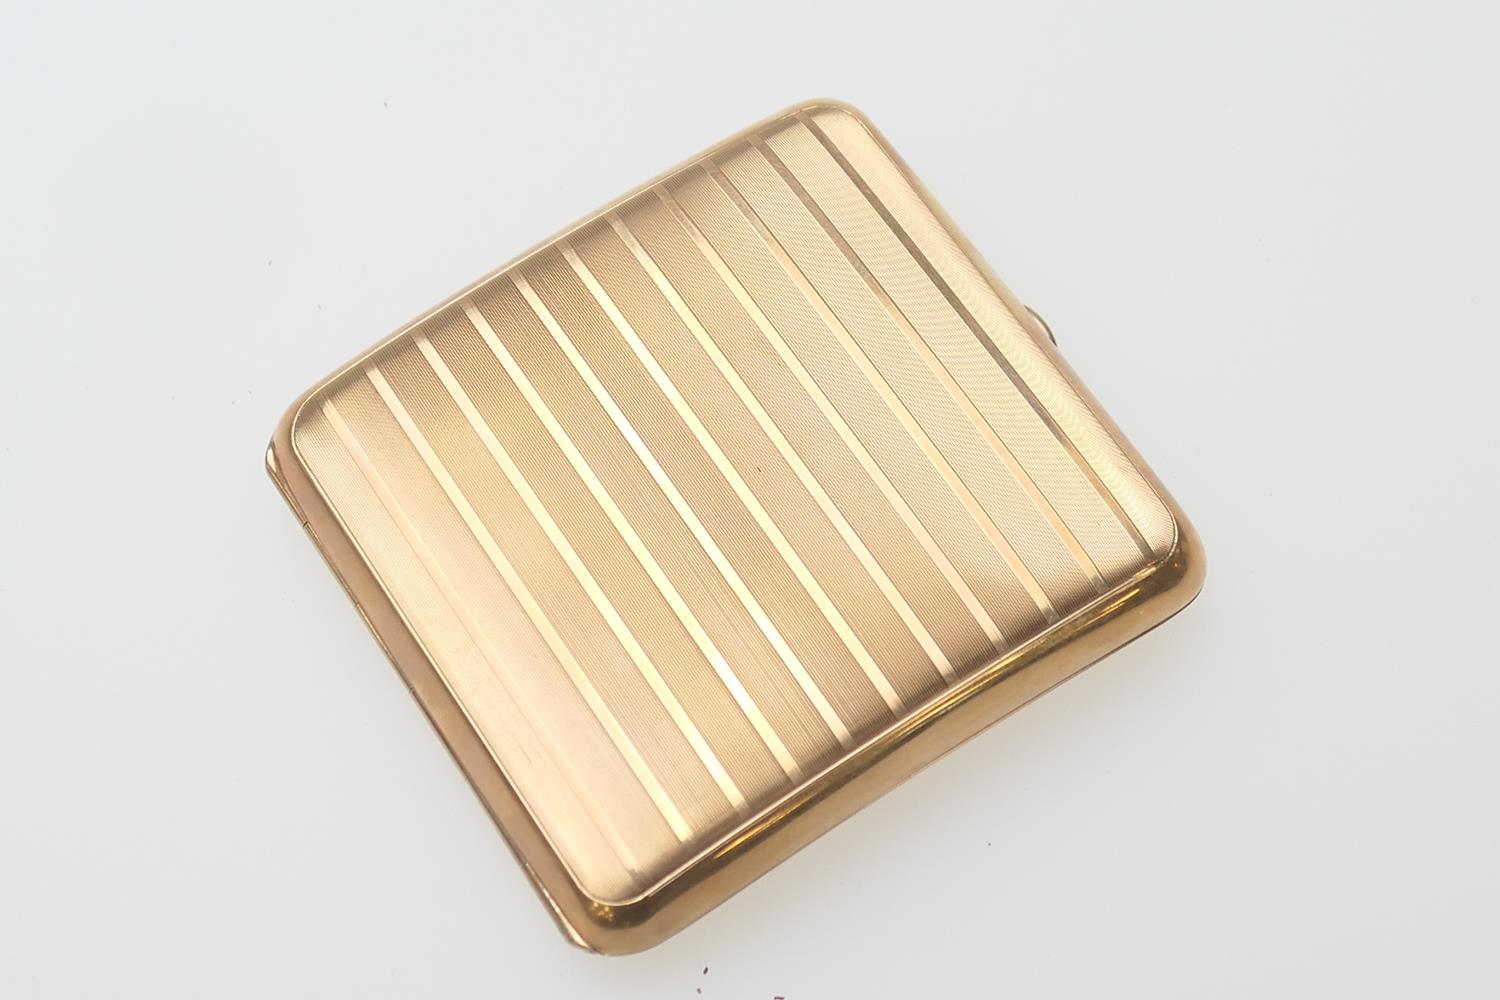 George V 9ct gold cigarette case, London 1920, curved form with engine turned vertilinear